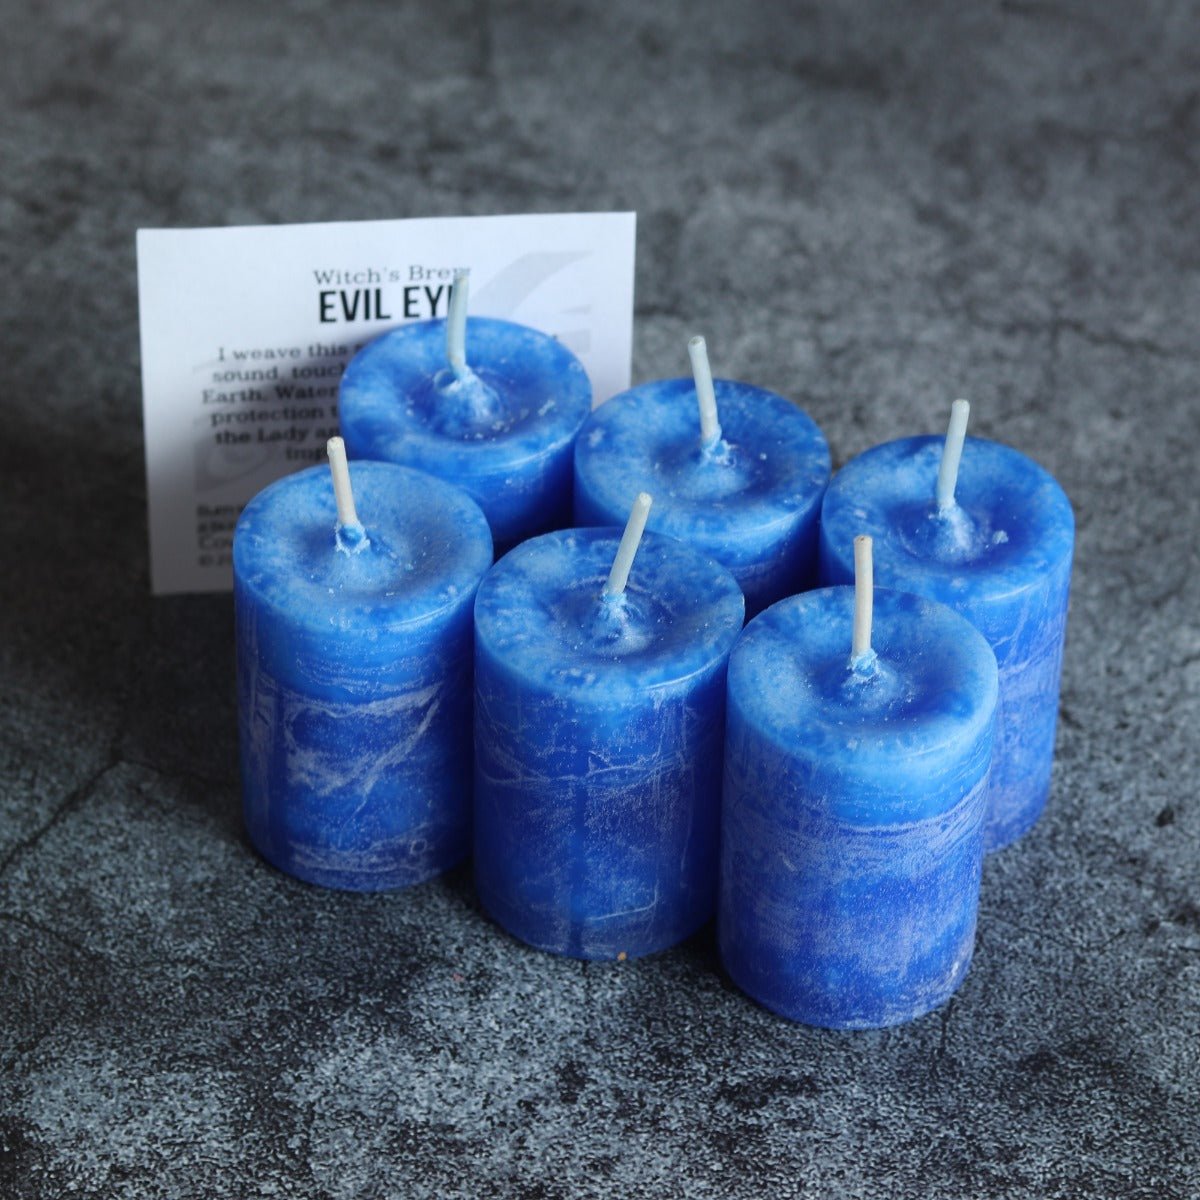 Votive, Witchs Brew Evil Eye, 6 of - 13 Moons